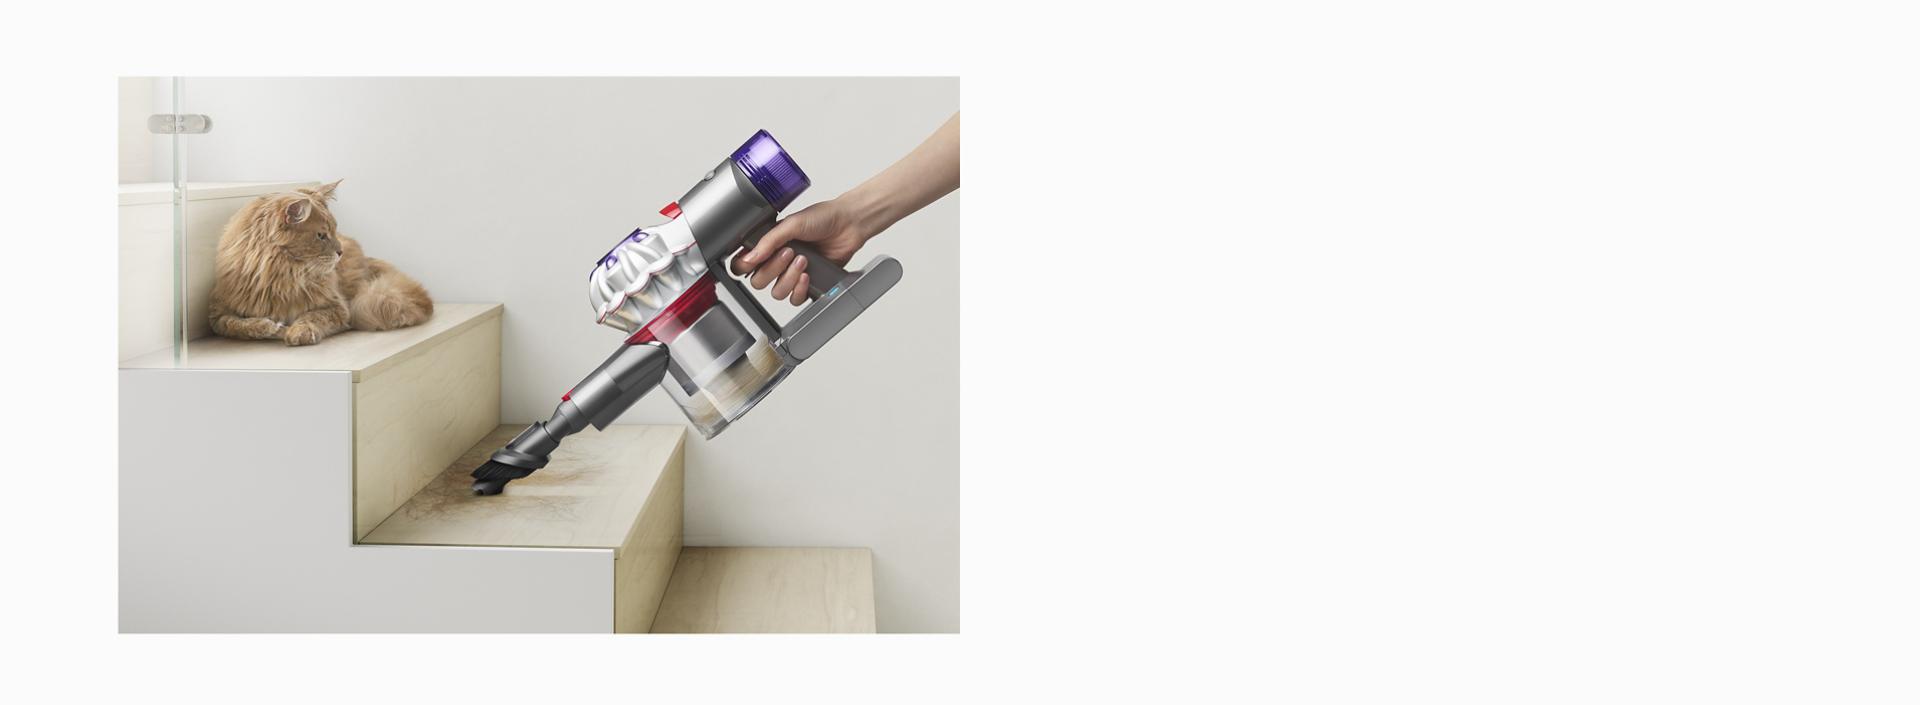 Dyson V8 vacuum being used as a handheld to clean stairs